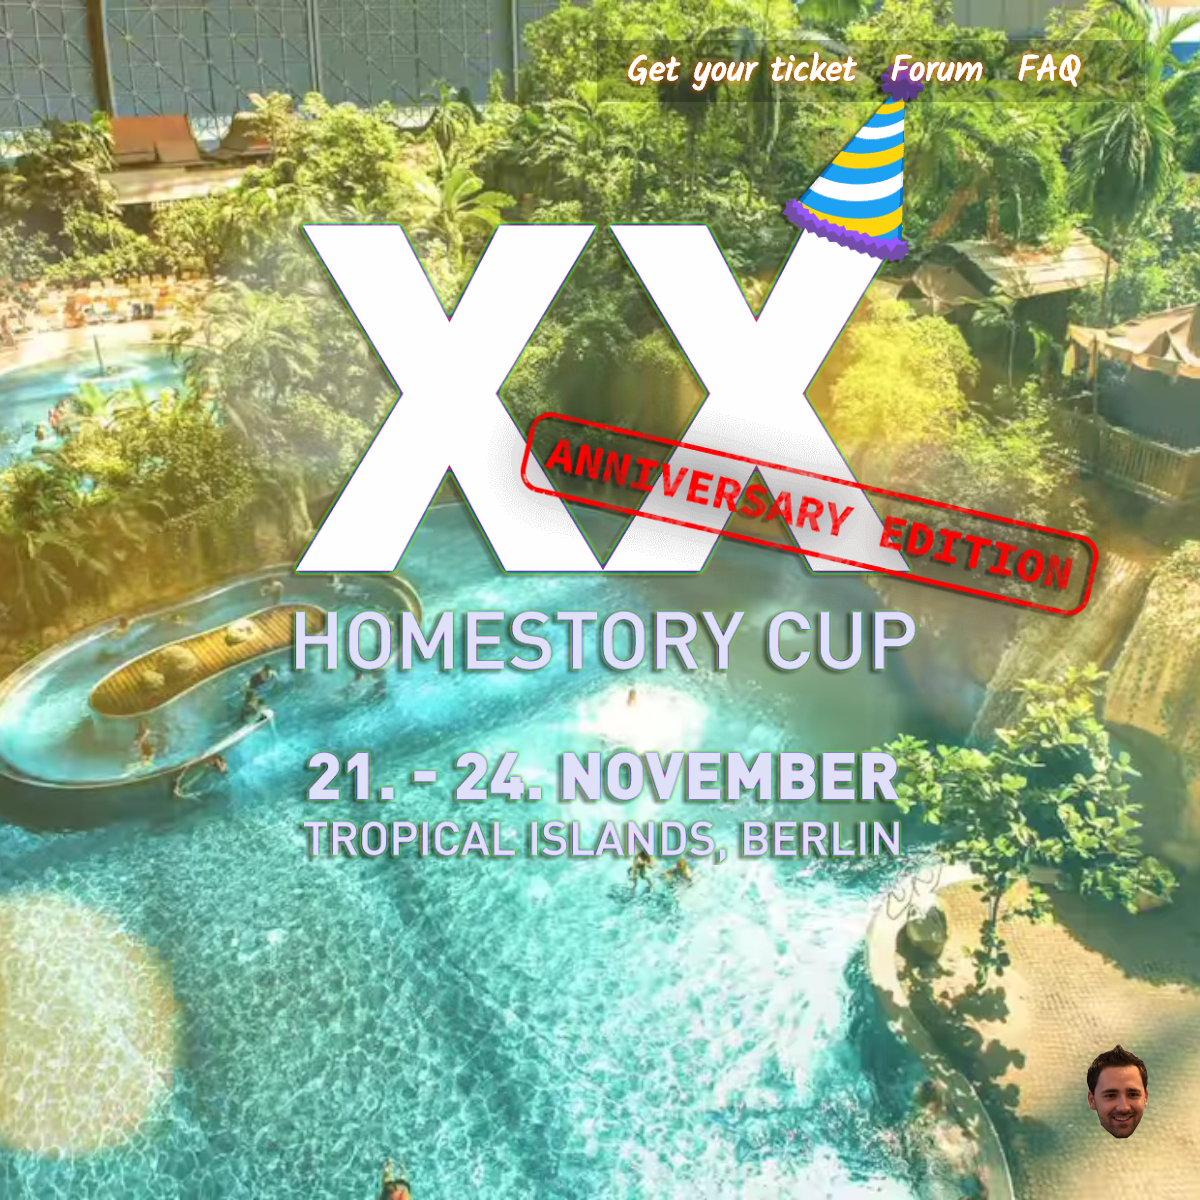 A complete backup of homestorycup.com